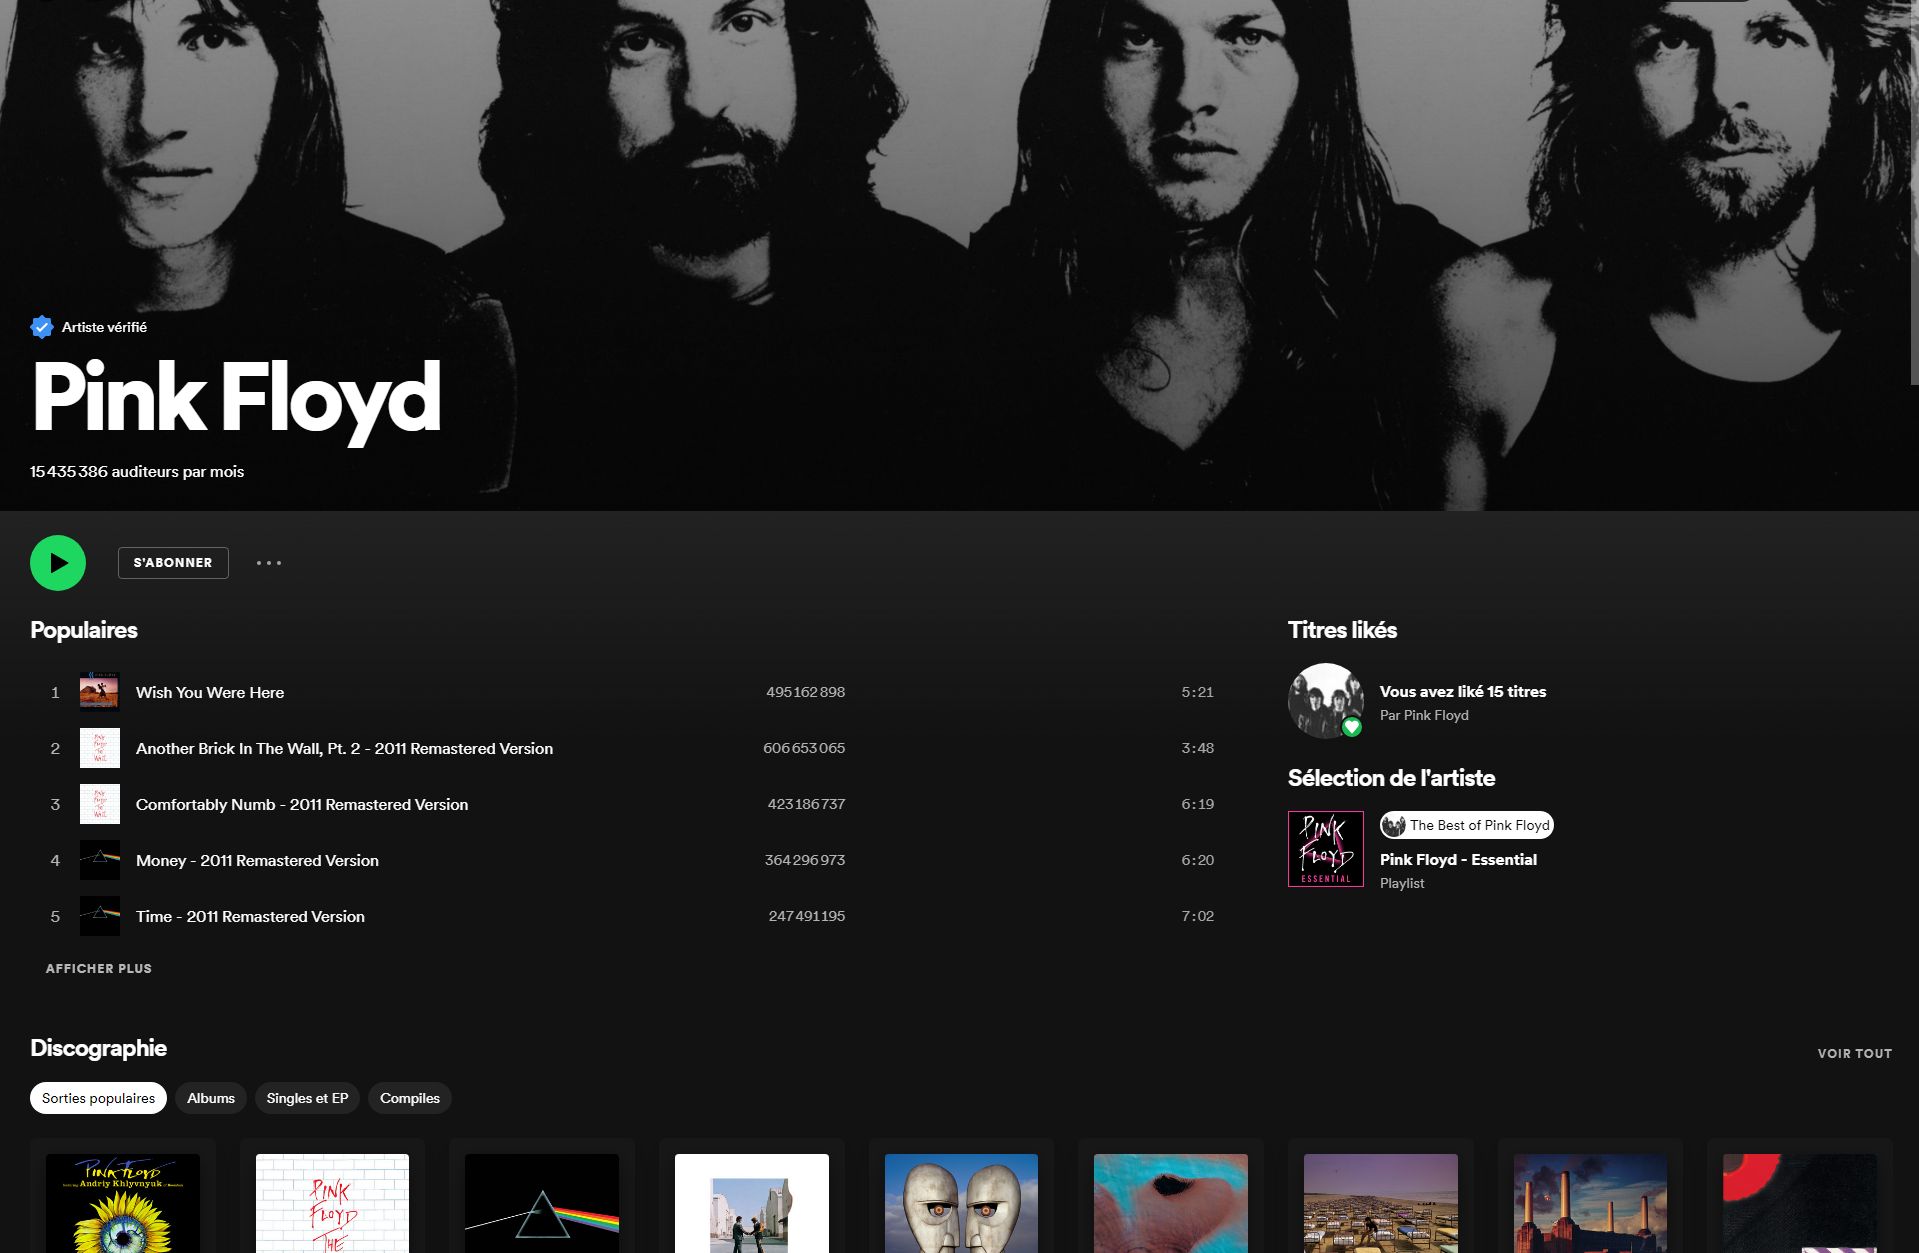 Profil Spotify du groupe Pink Floyd - RightsNow!